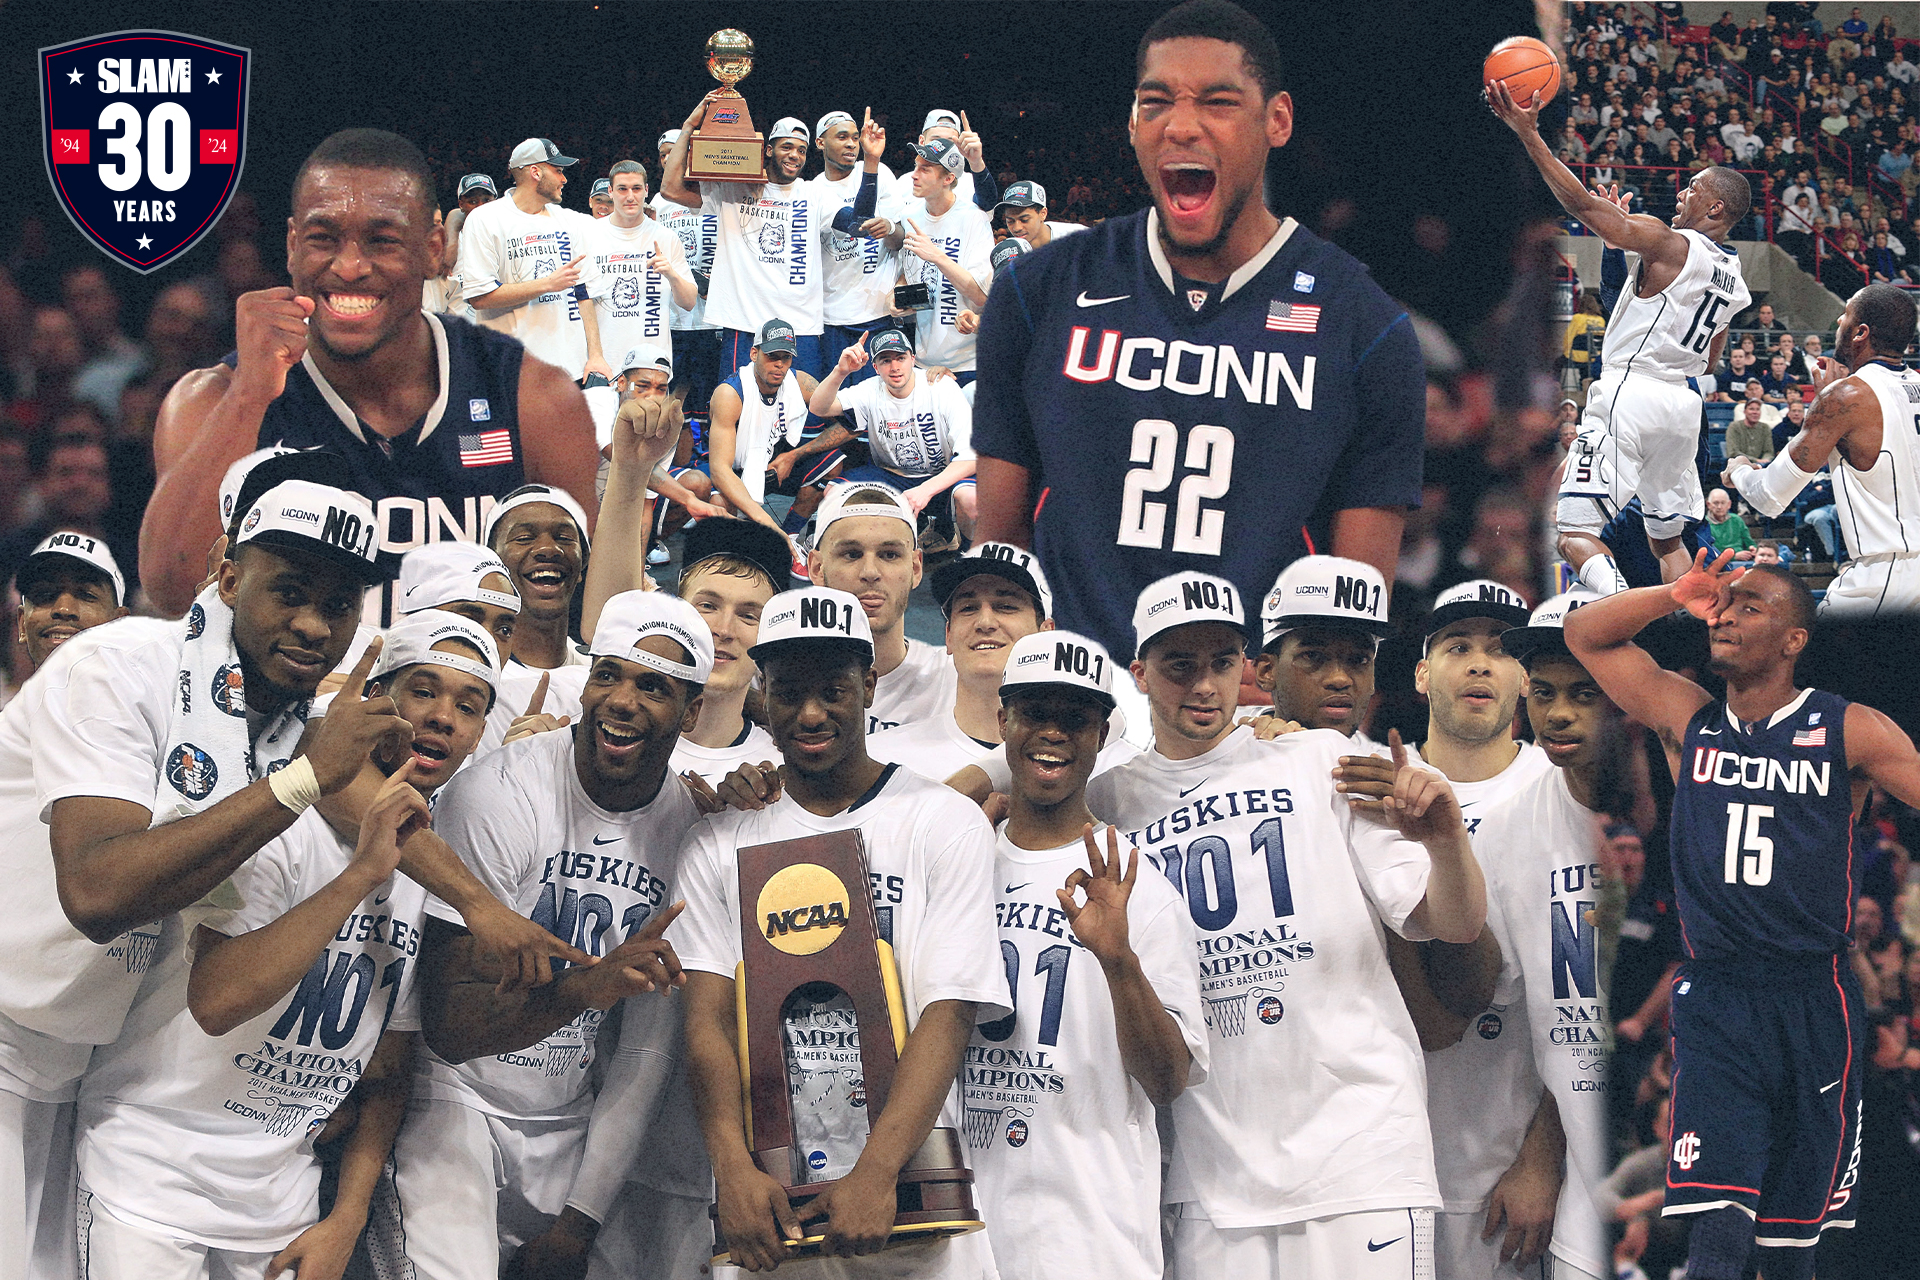 The 30 Most Influential NCAA MBB Groups of SLAM’s 30 Years: 2011 UCONN 